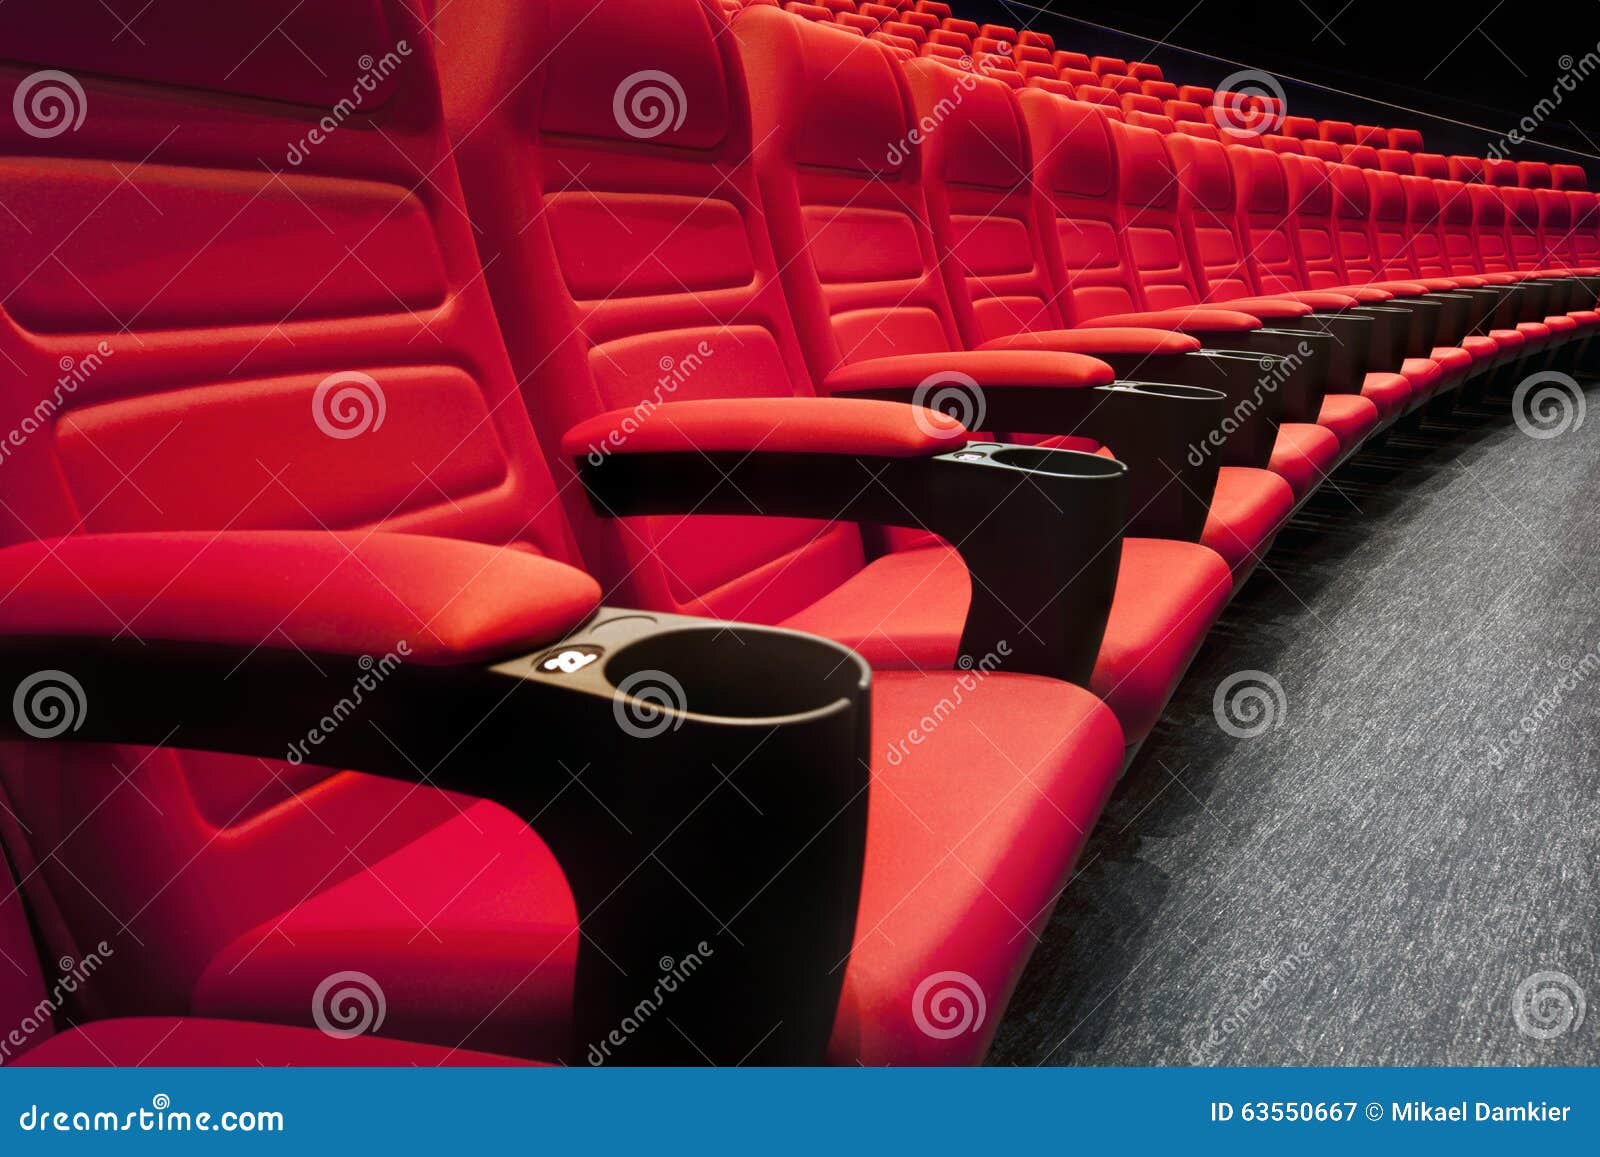 empty rows of red theater